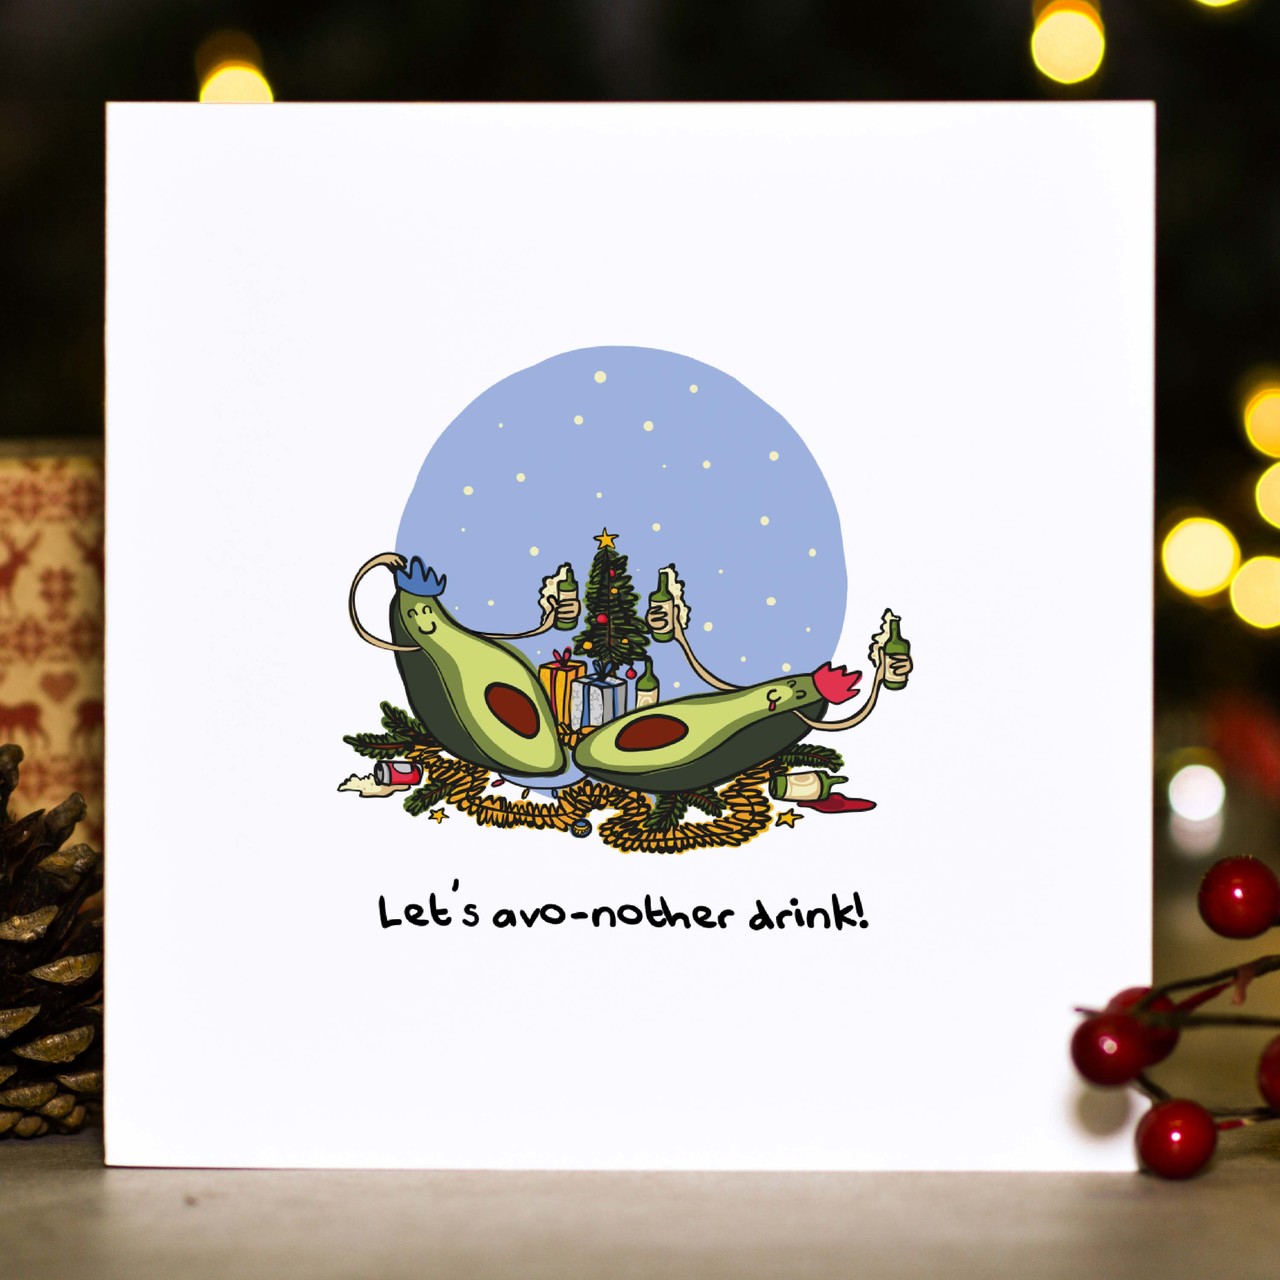 Let’s avo-nother drink! Christmas Card